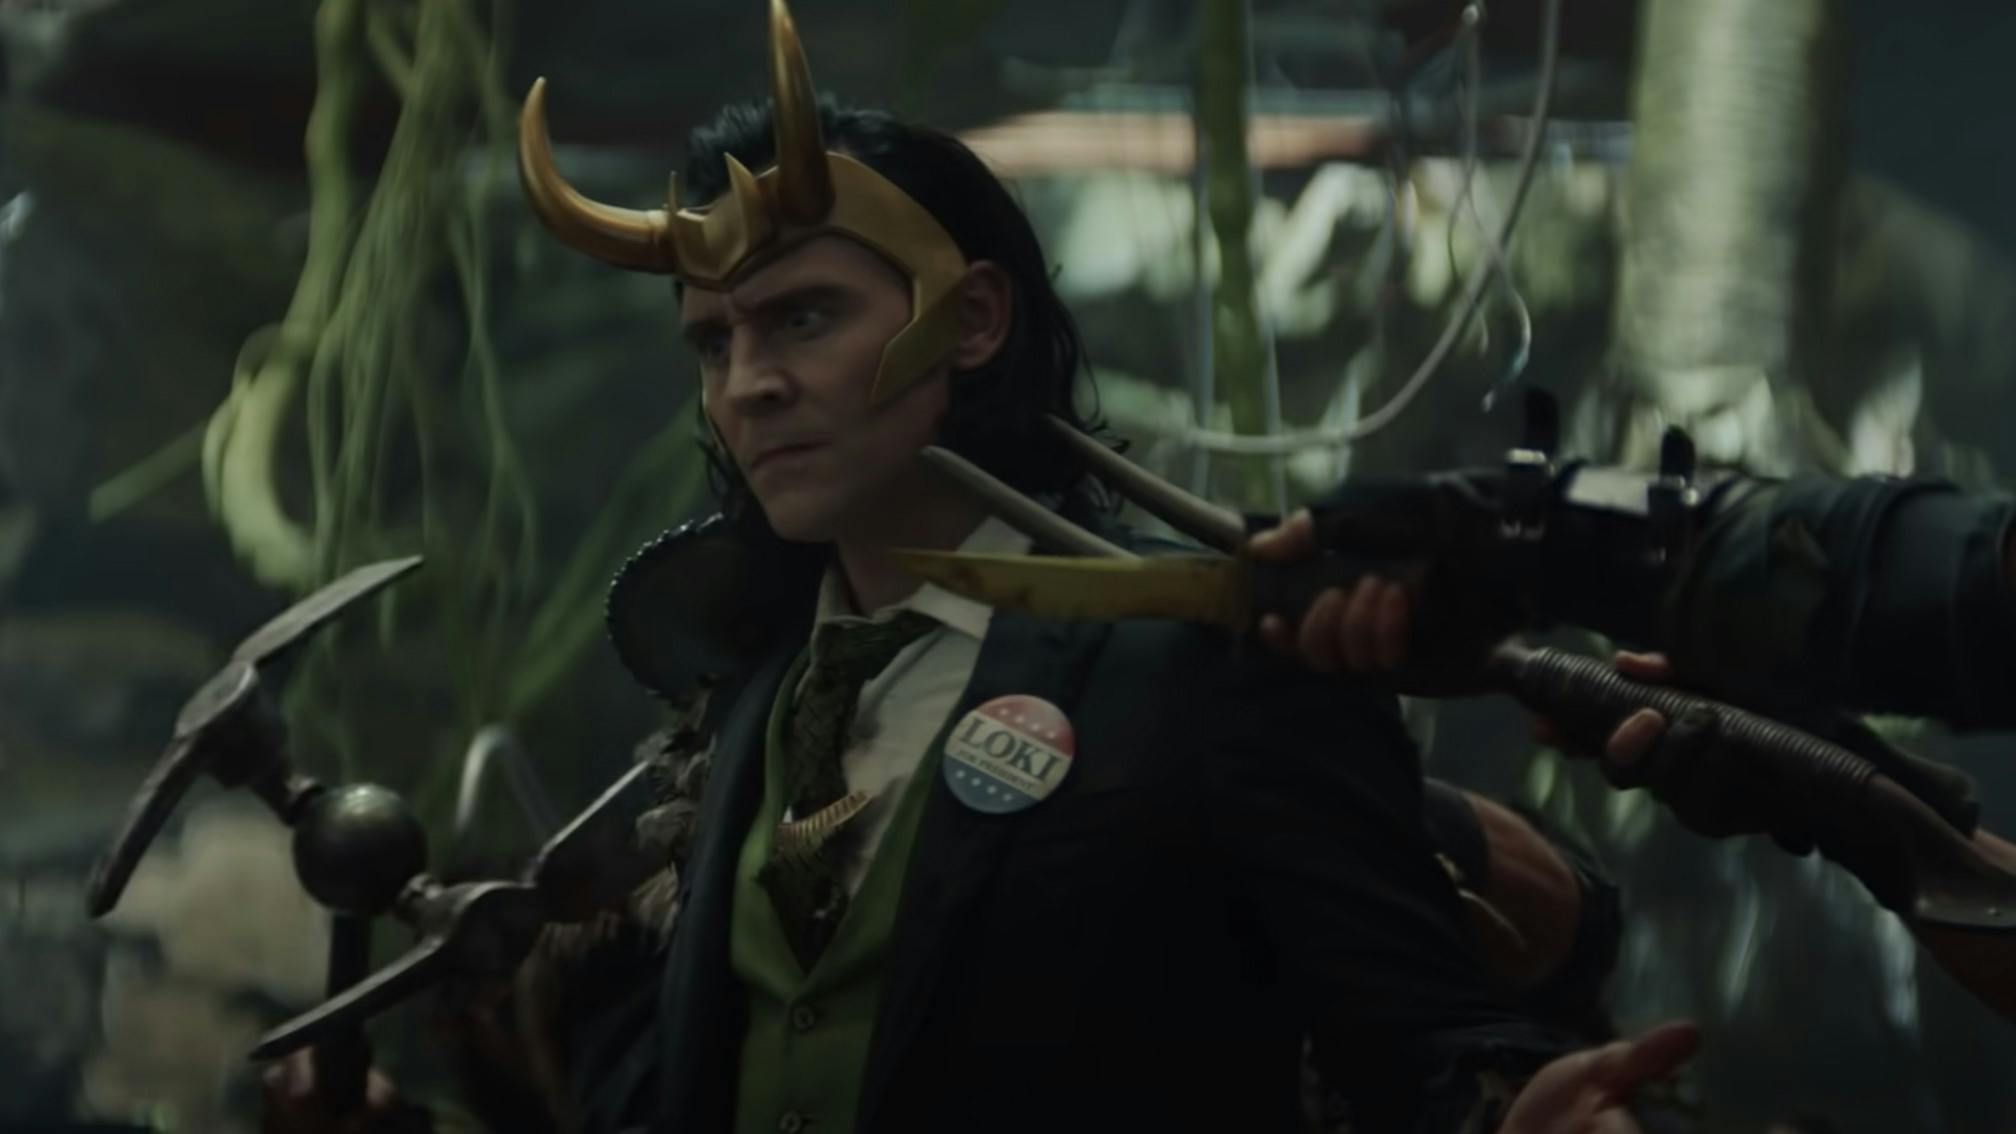 Watch the official trailer for Marvel's new Loki spin-off series